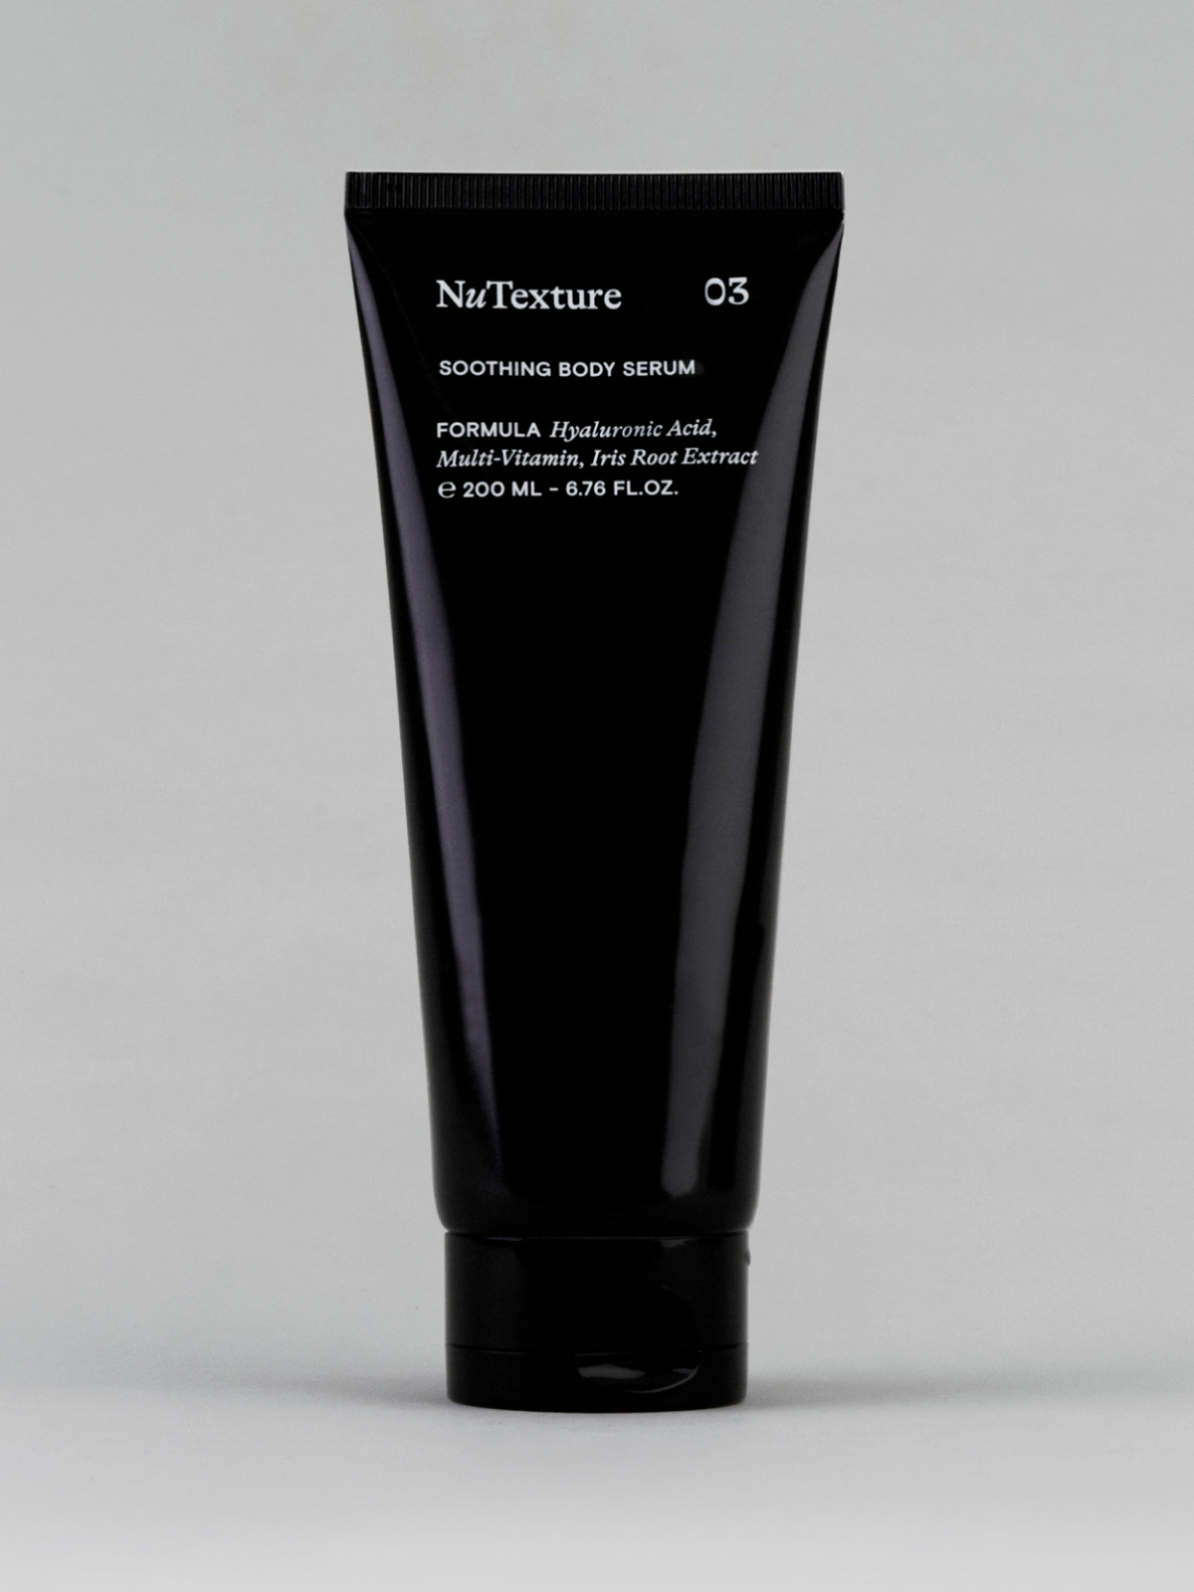 [NuTexture] SOOTHING BODY SERUM